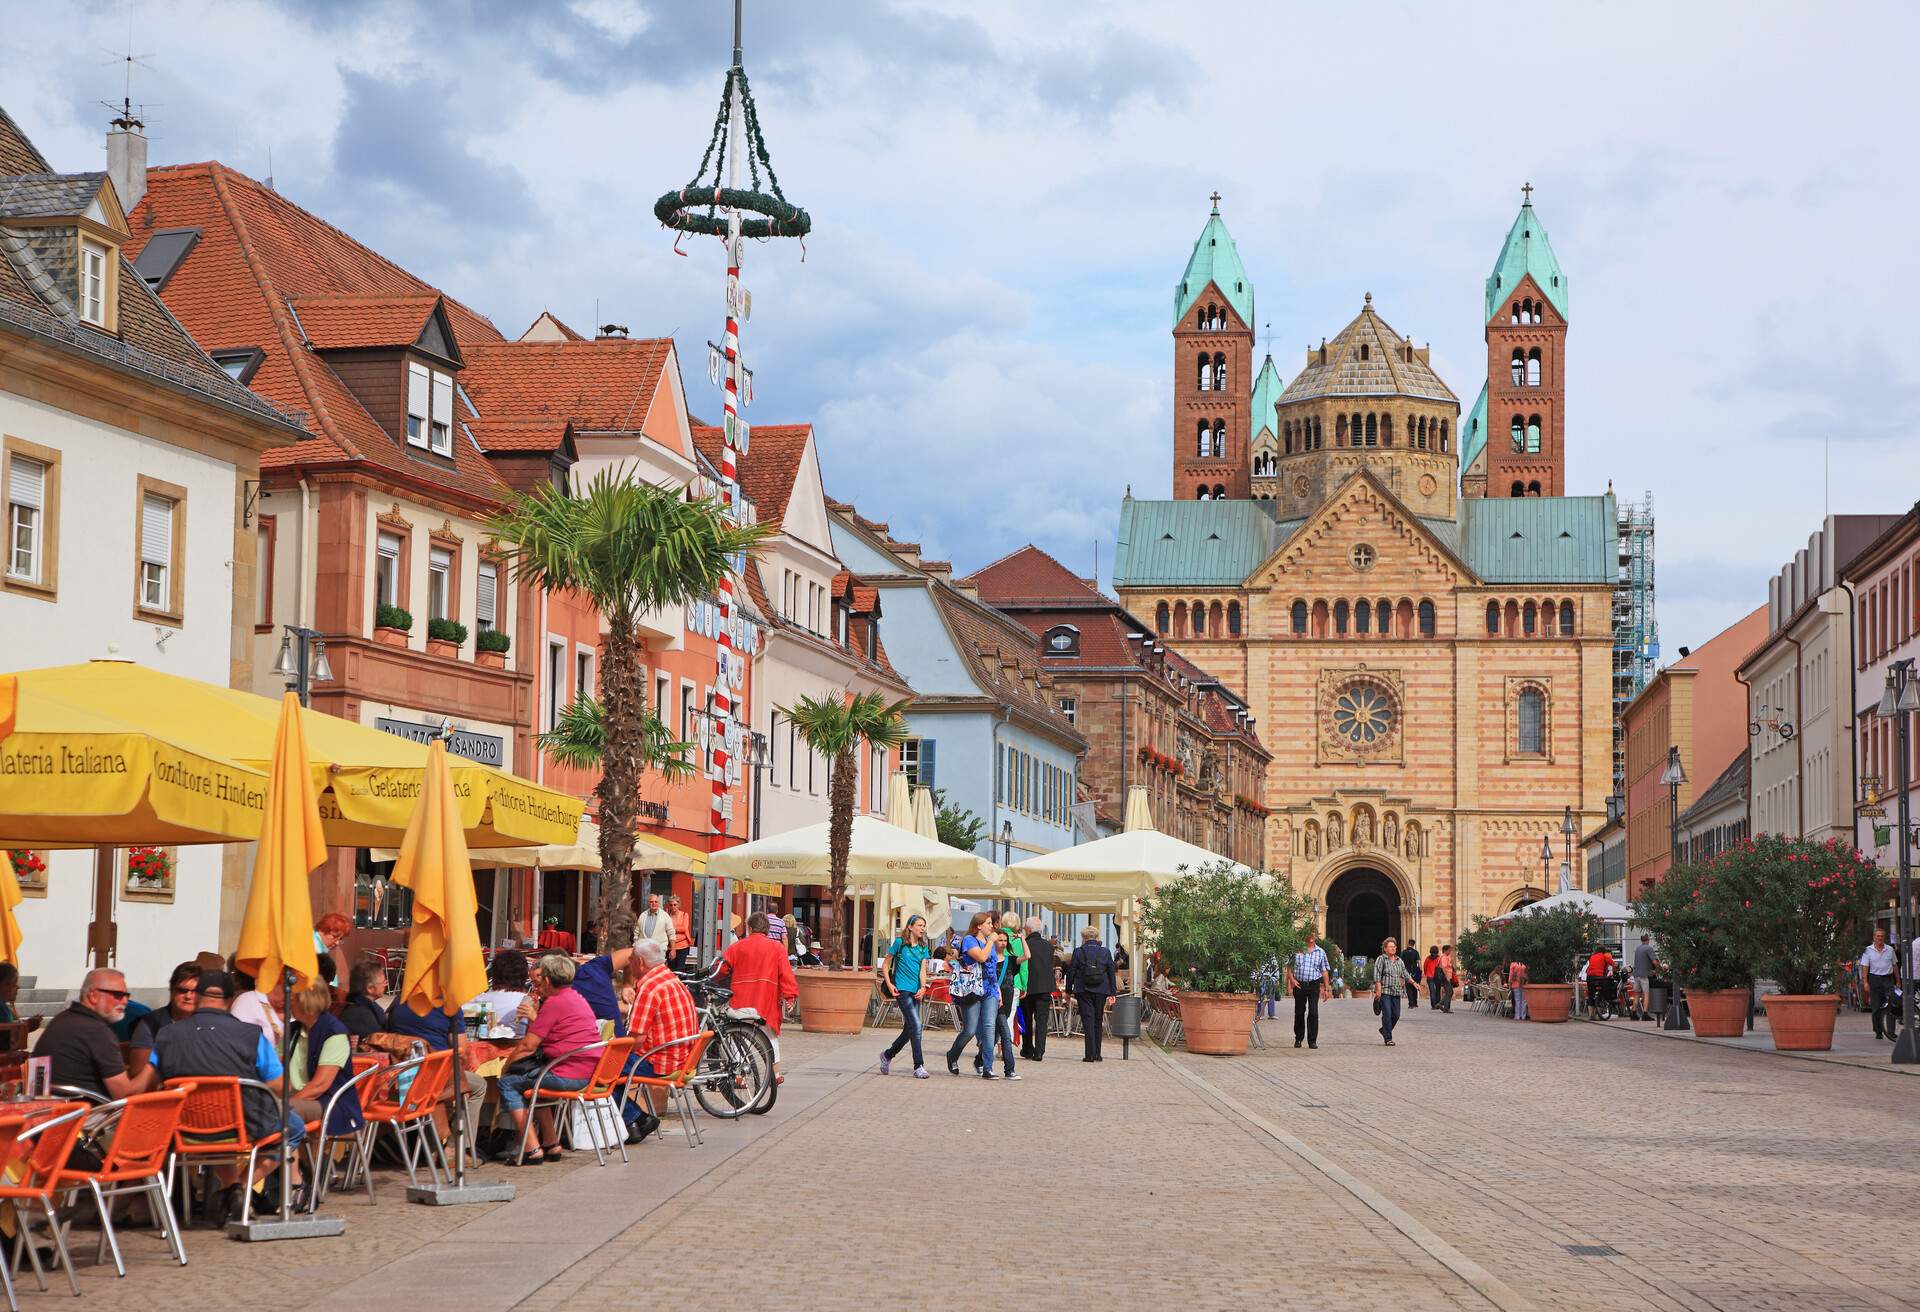 Maximilian street with pavement cafe, Cathedral in background, Speyer, Rhineland-Palatinate, Germany.